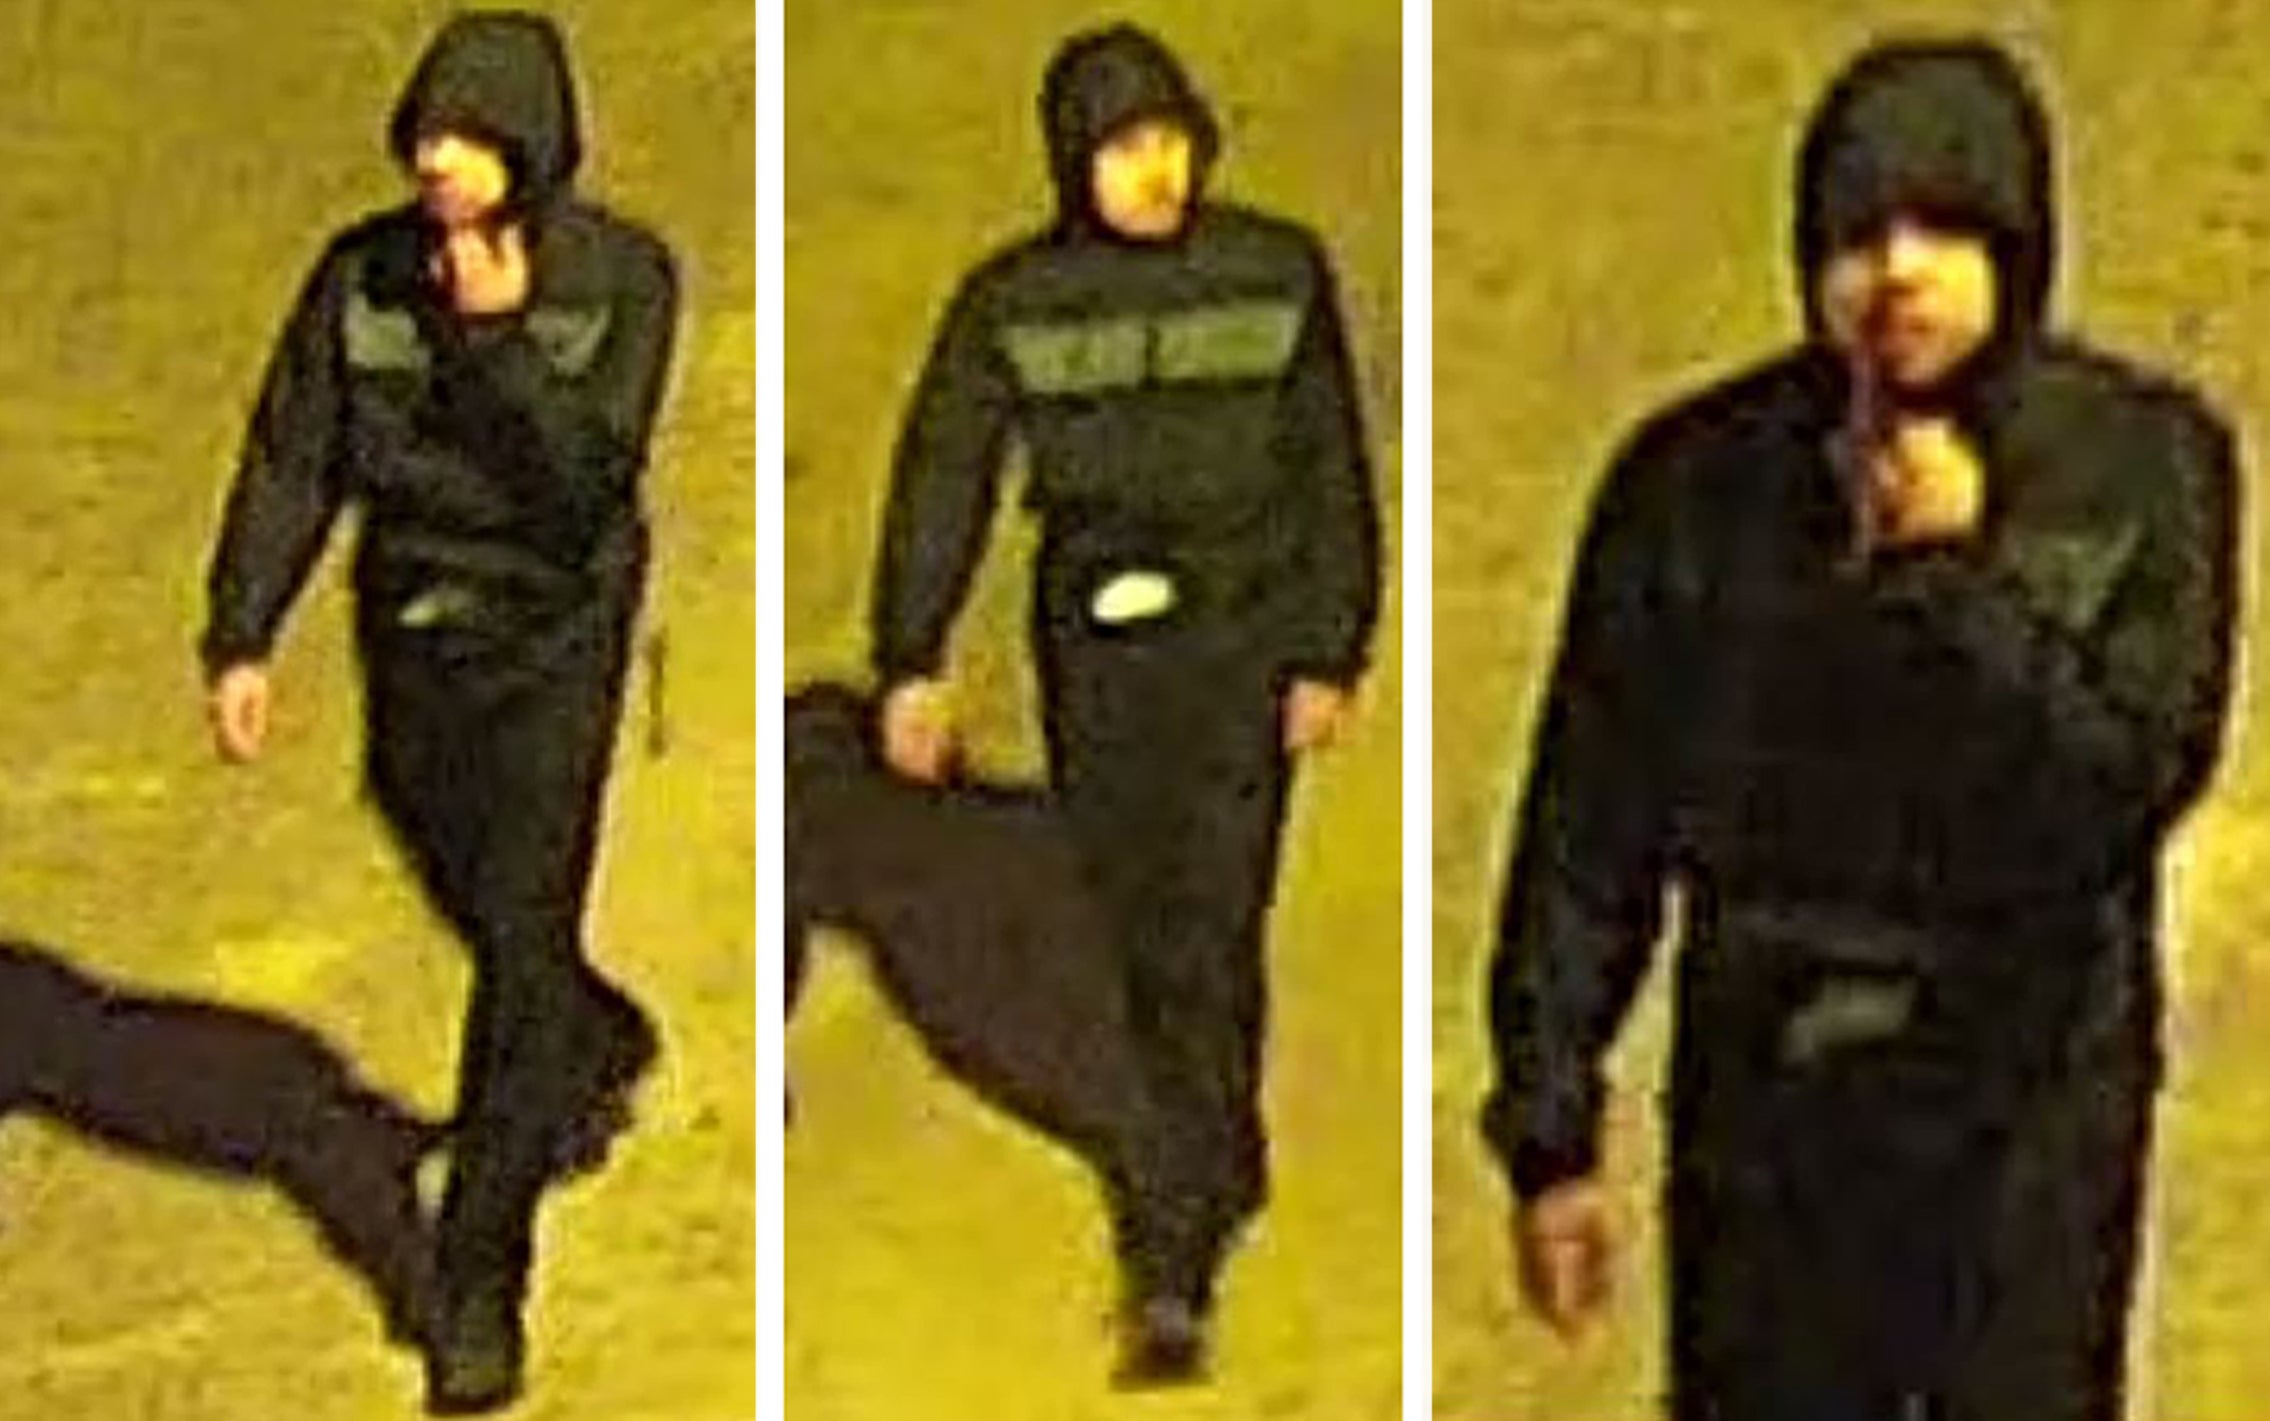 Dorset Police have released images of a suspect after a woman was fatally stabbed in Bournemouth